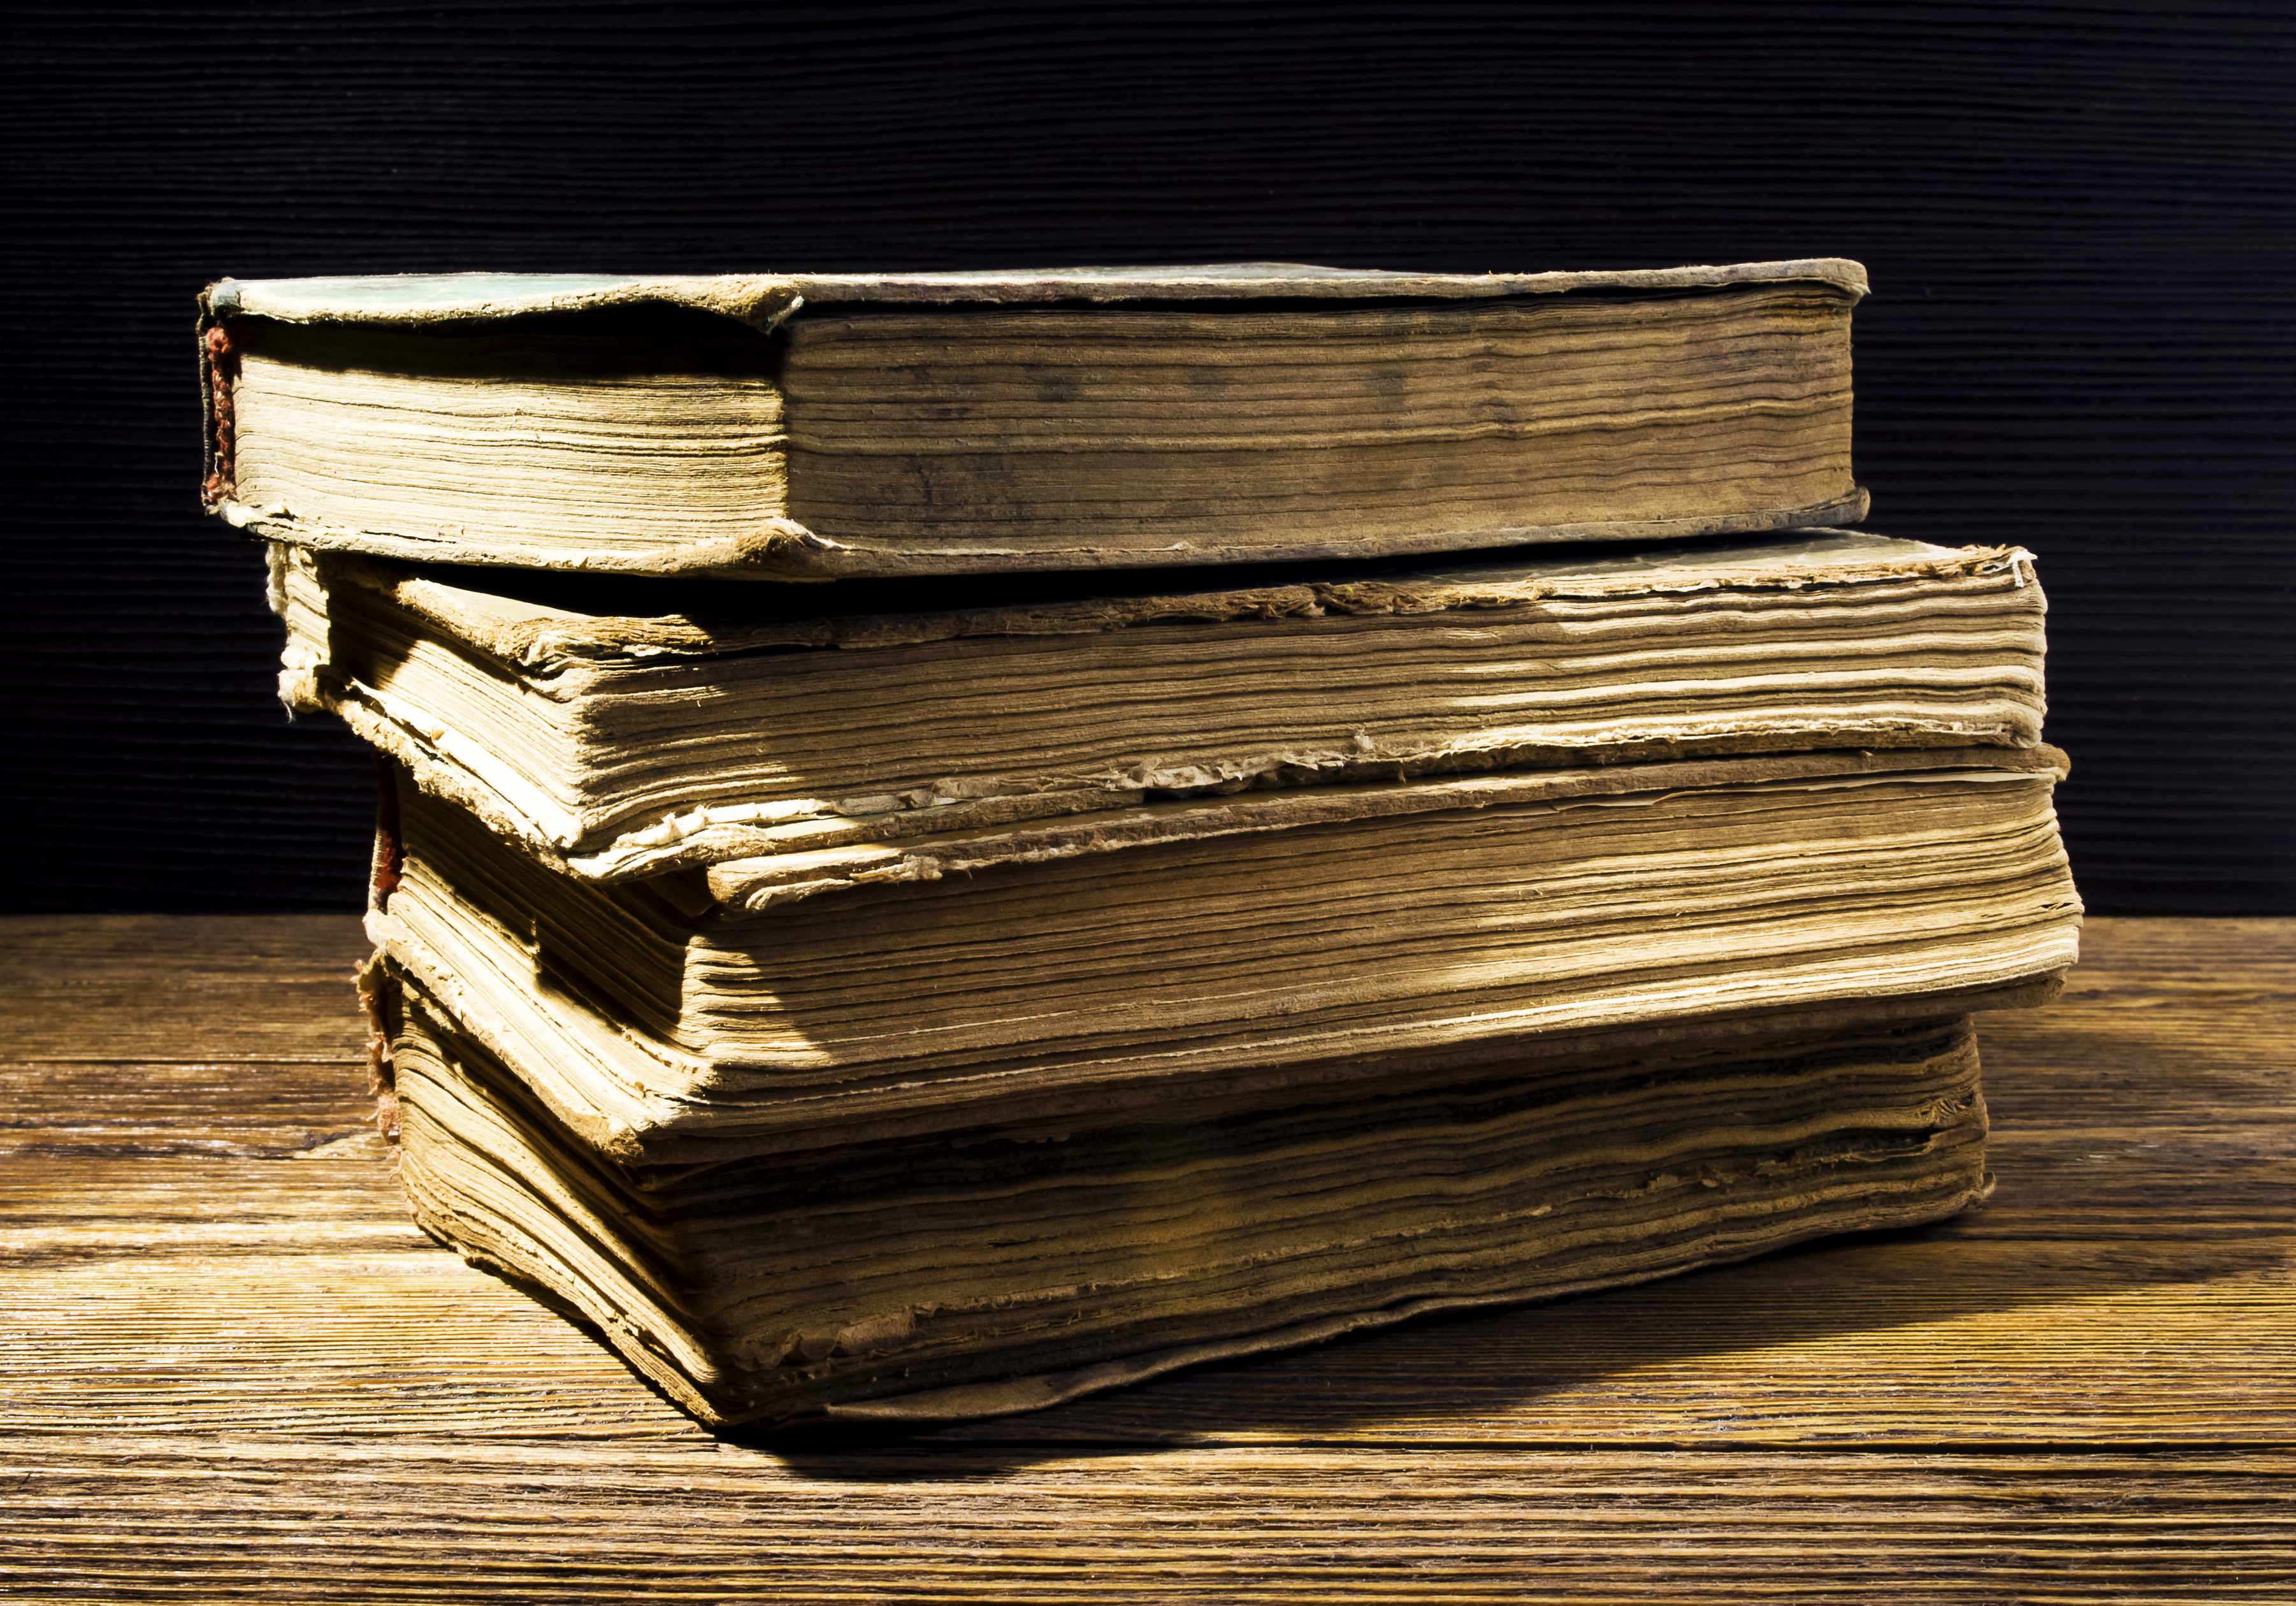 How ISIS Makes $3 Million A Day: Selling Ancient Books | Ravishly ...